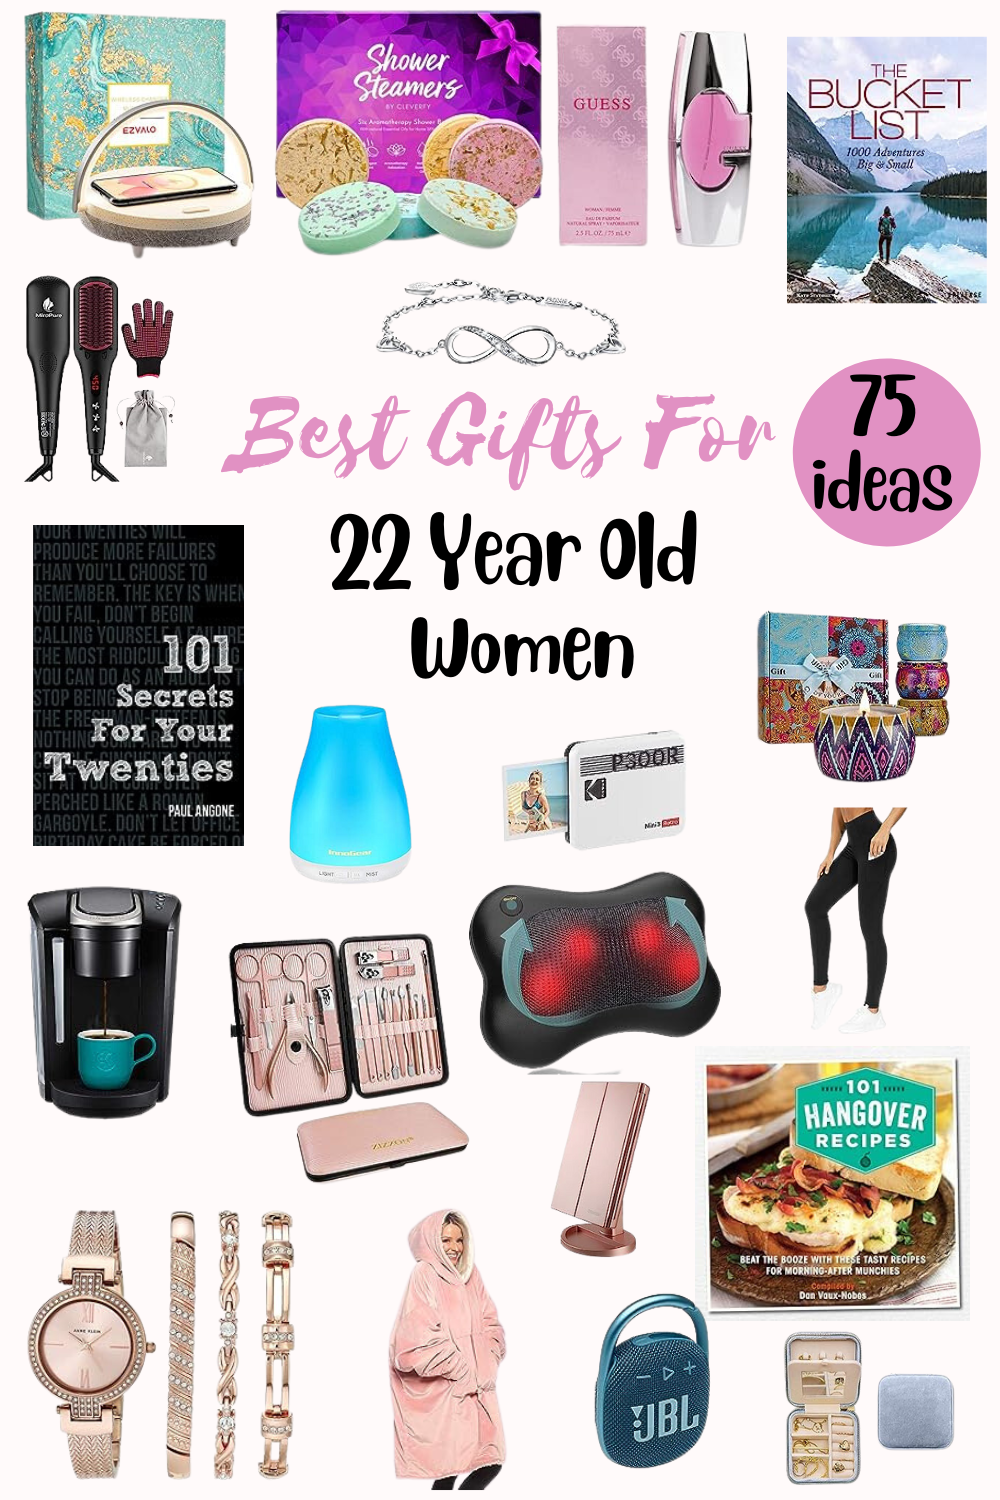 75+ PRACTICAL GIFT IDEAS FOR EVERYONE! | under $25, $50, $100+ (2022  holiday gift guide) with links! - YouTube